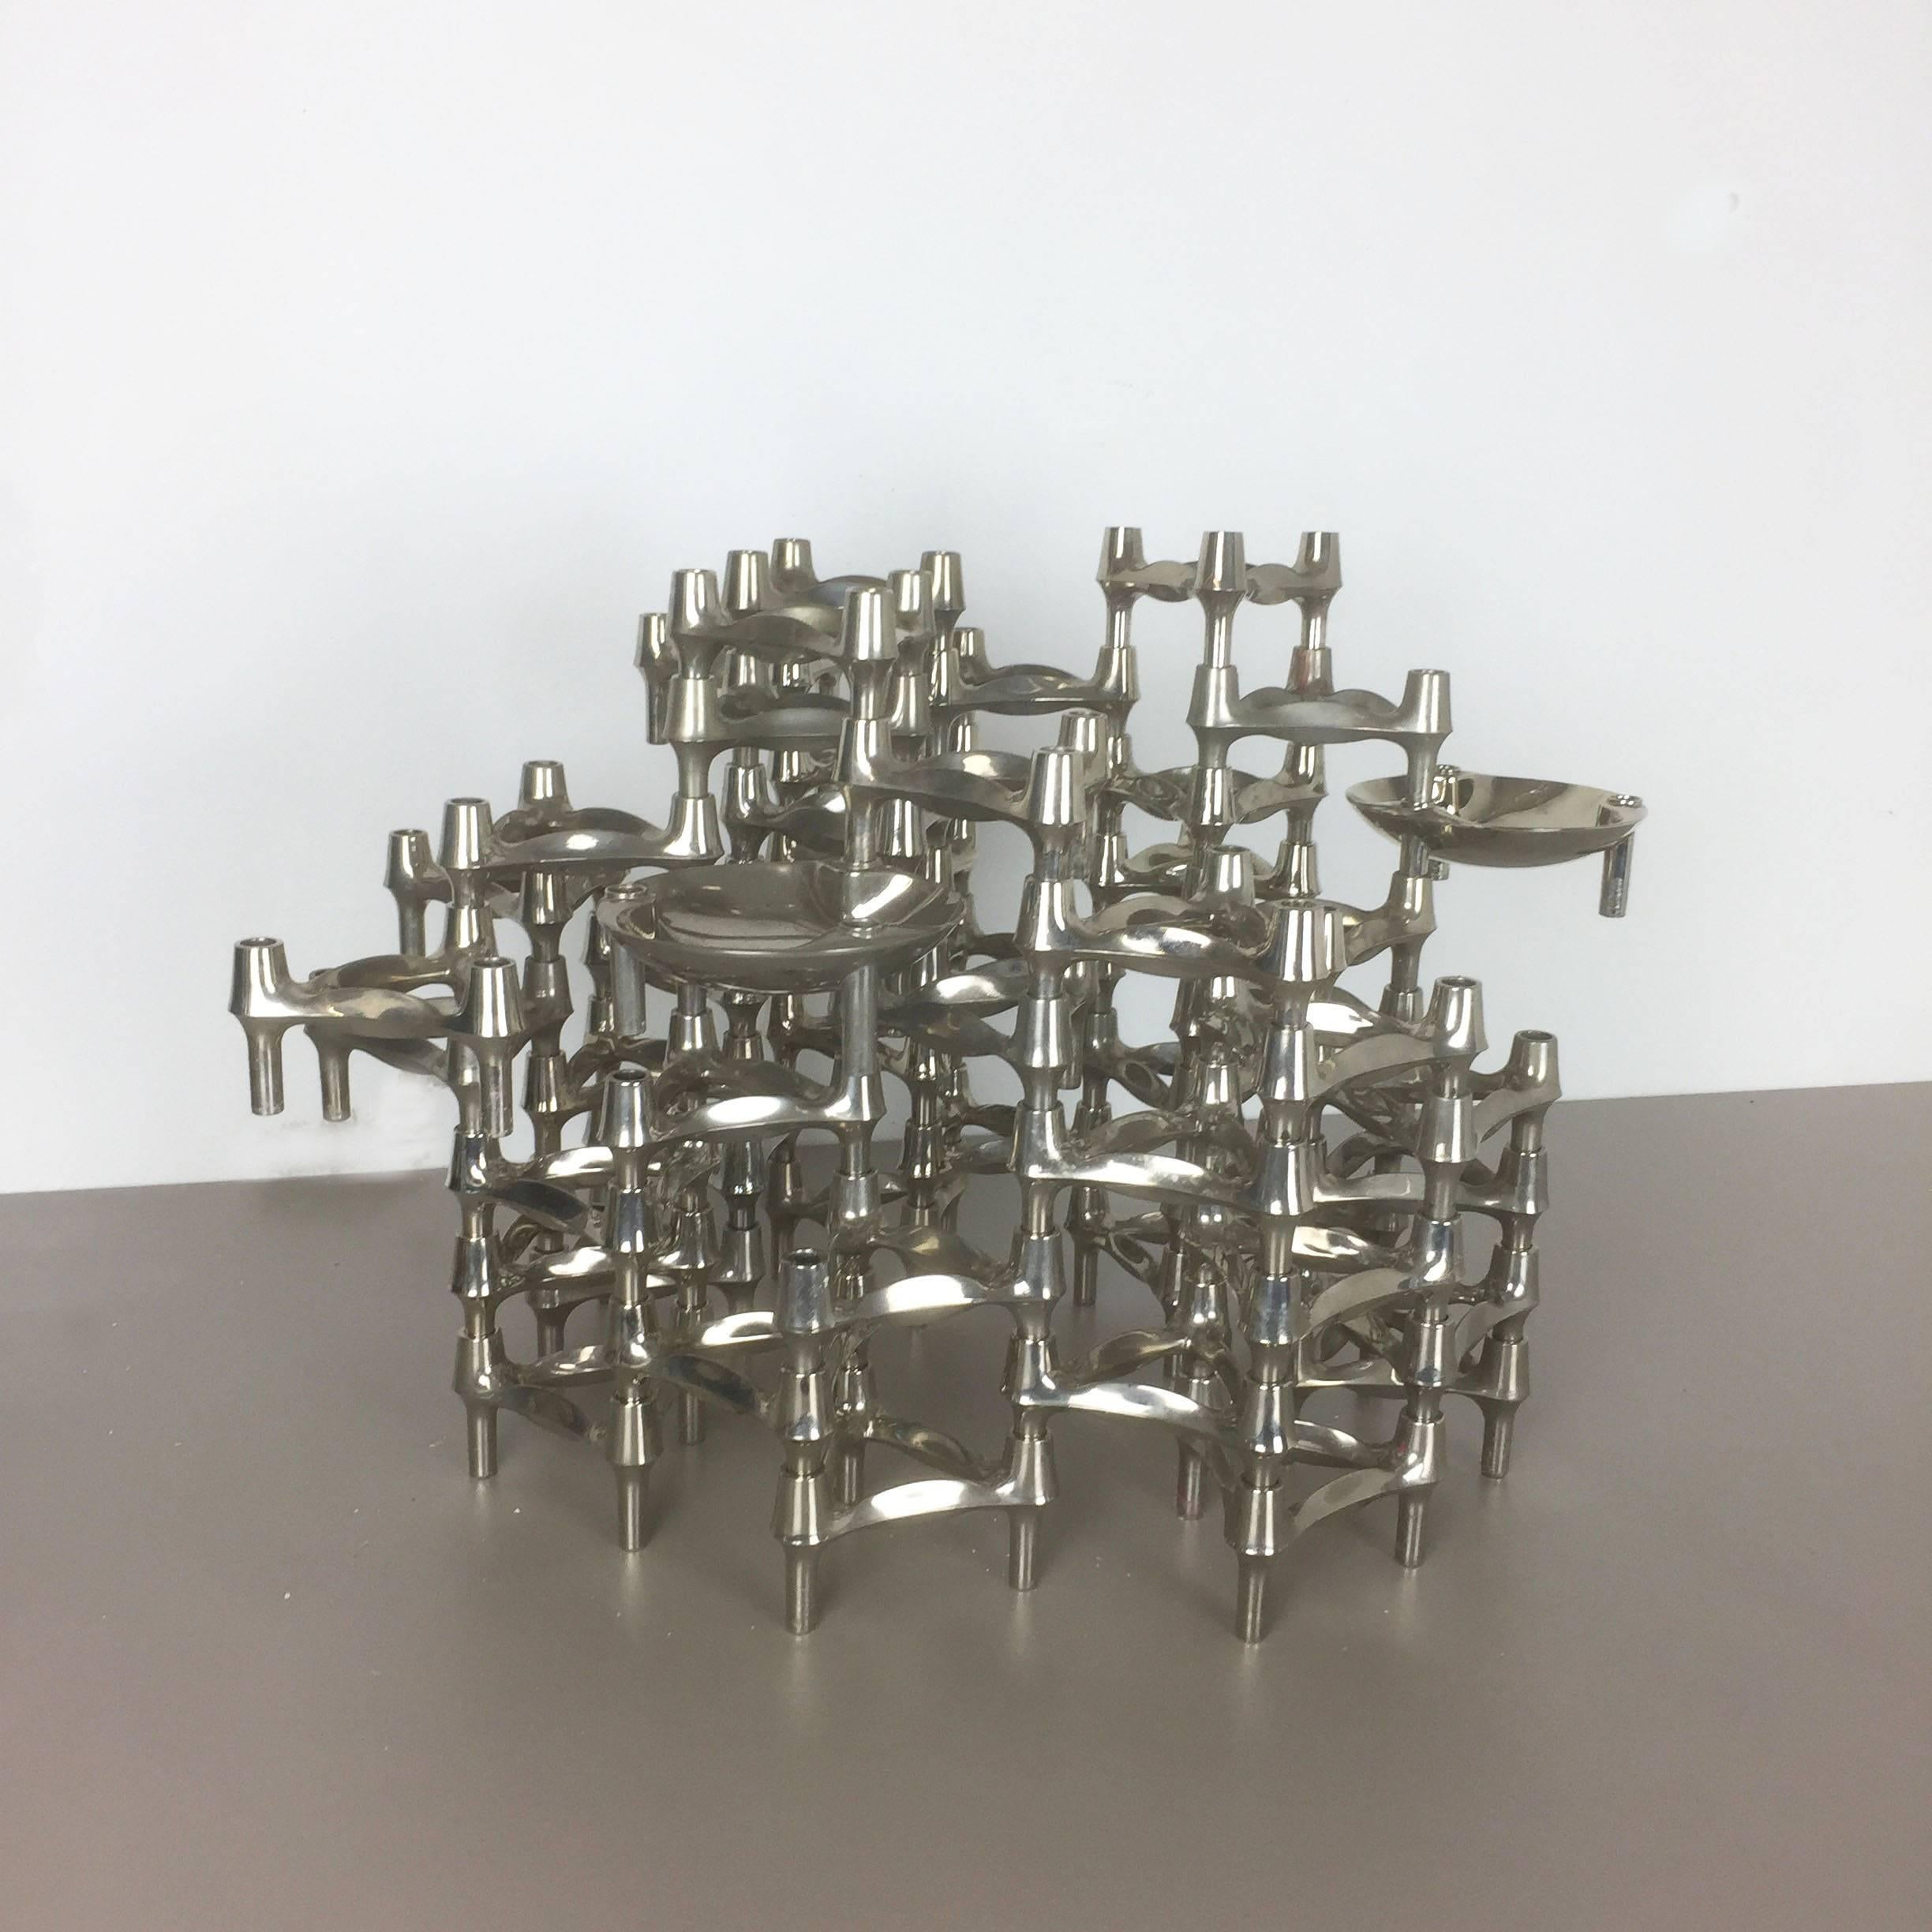 Mid-Century Modern Vintage 1970s BMF Nagel Candleholder Sculpture with 52 Elements by Caesar Stoffi